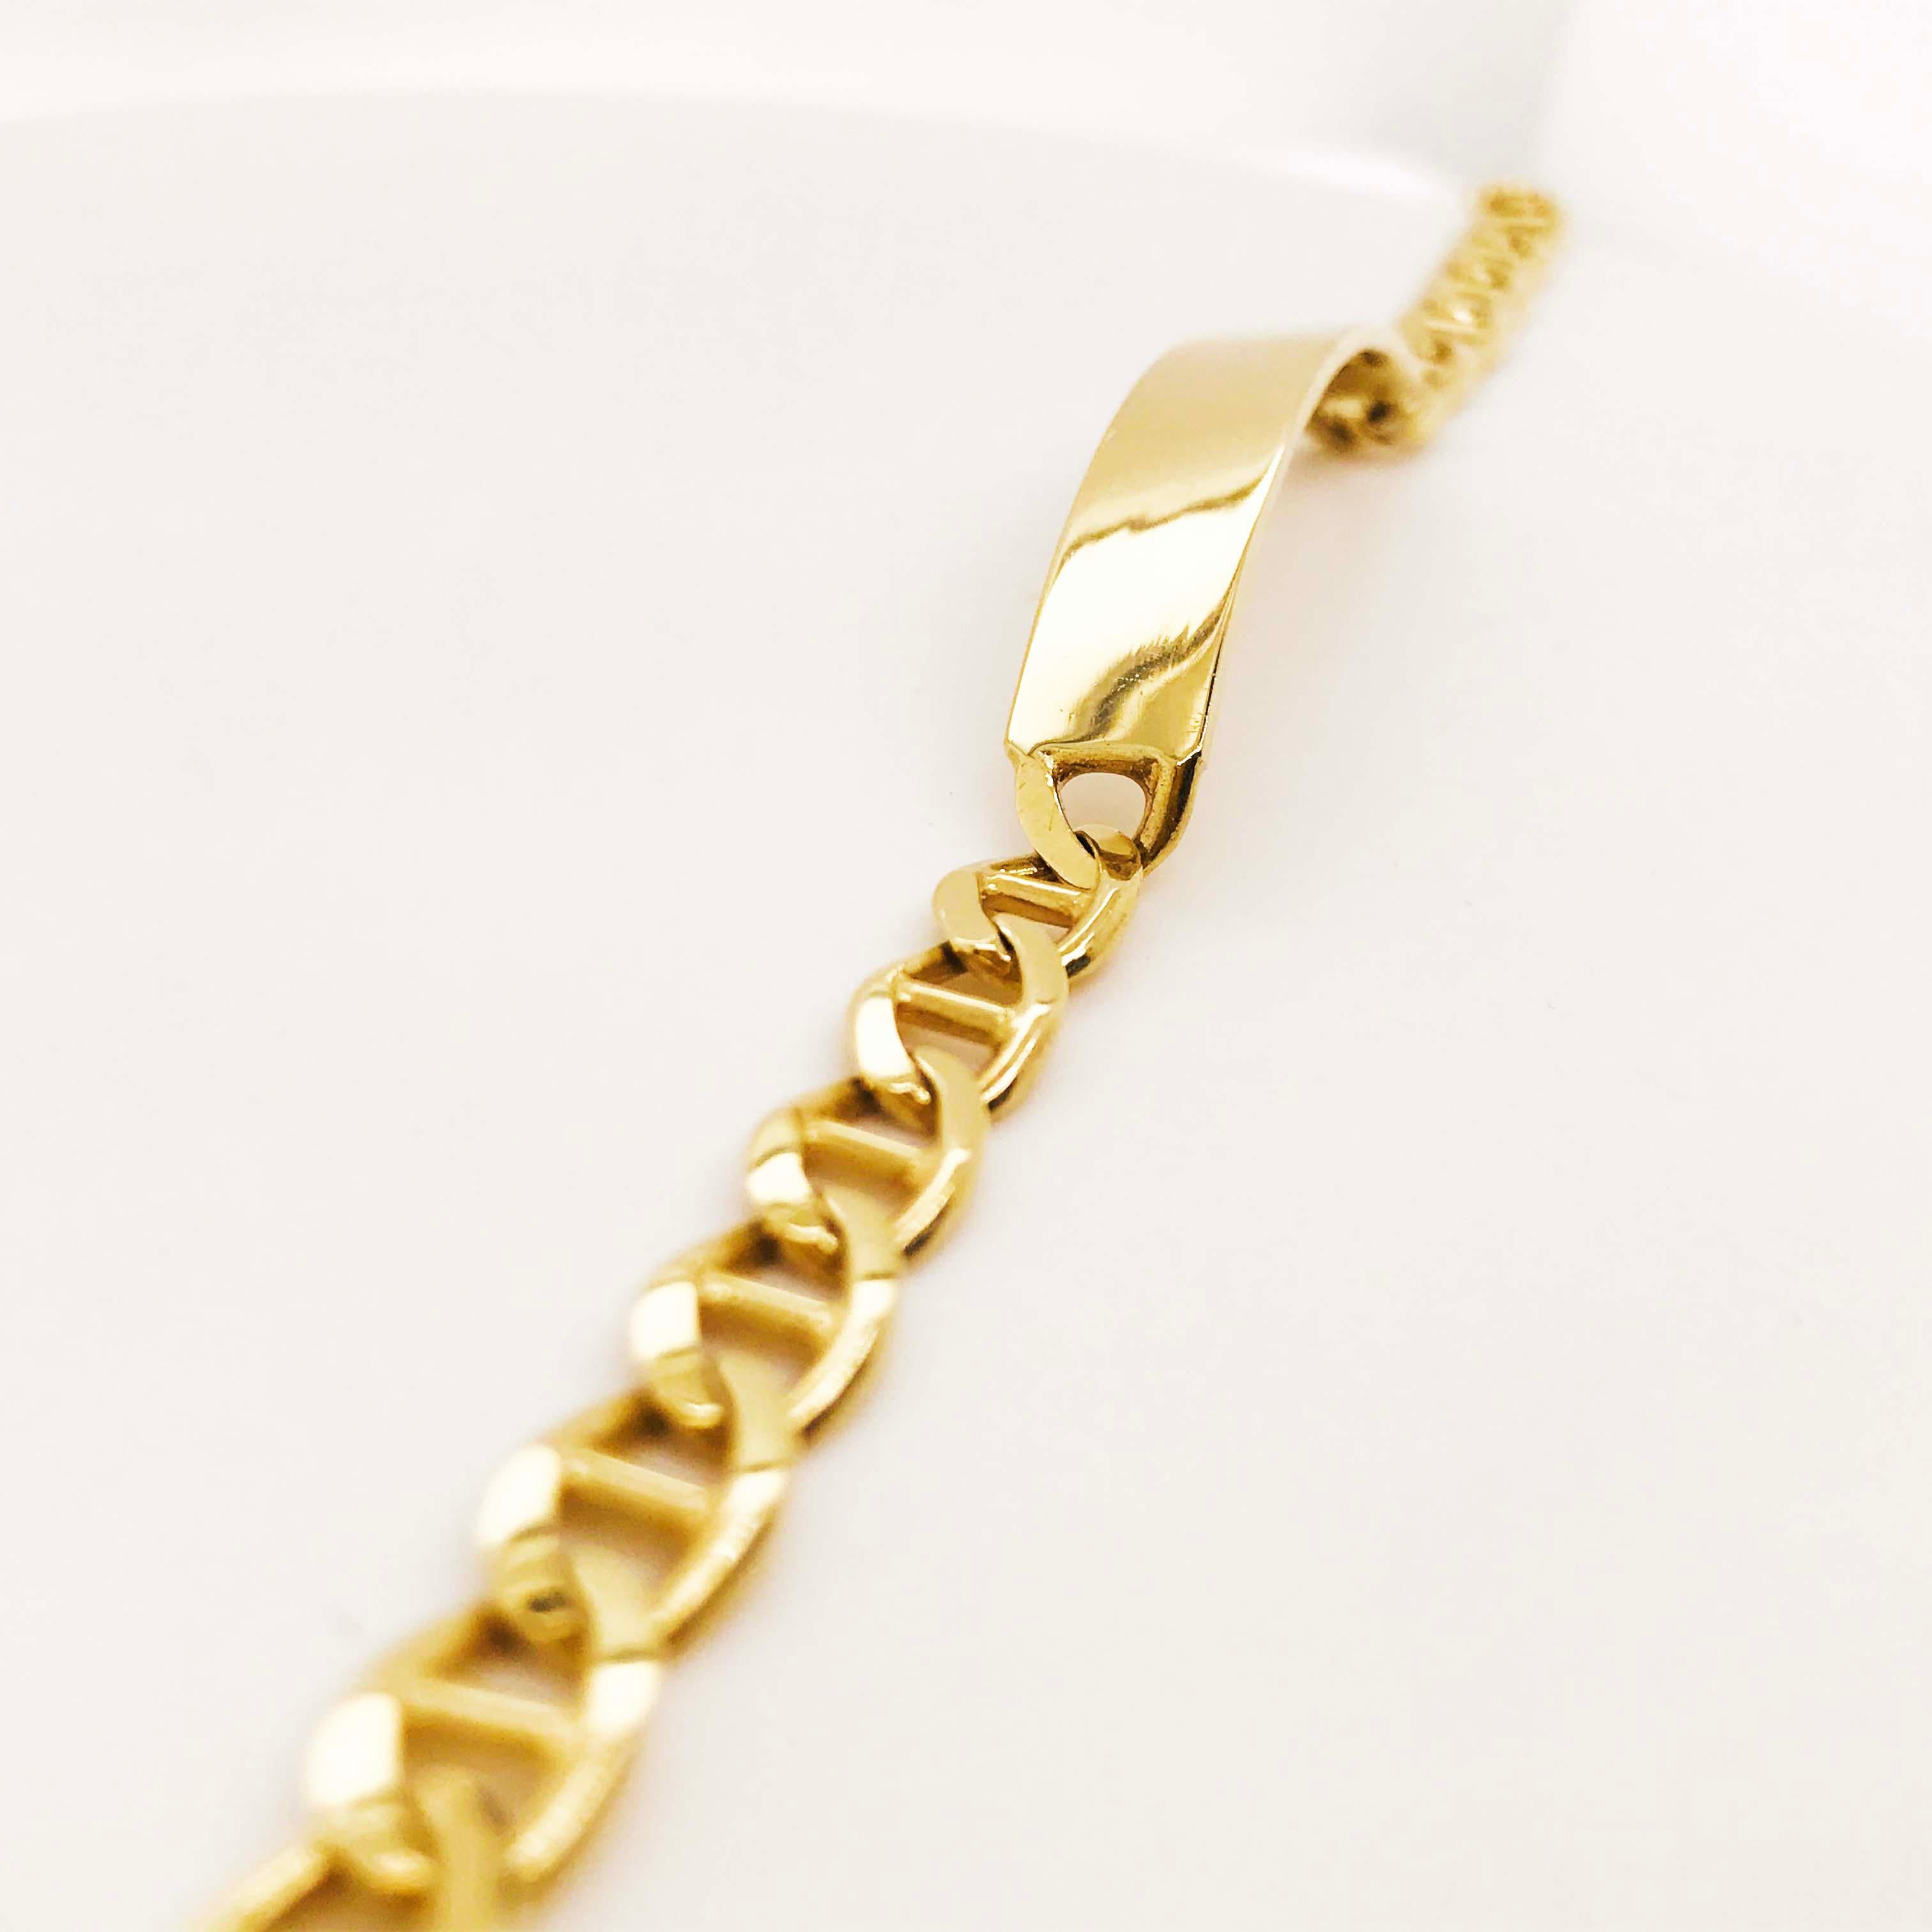 Engravable ID Bracelet in 14 kt Gold with Anchor Link Chain for Men or LG Woman 3